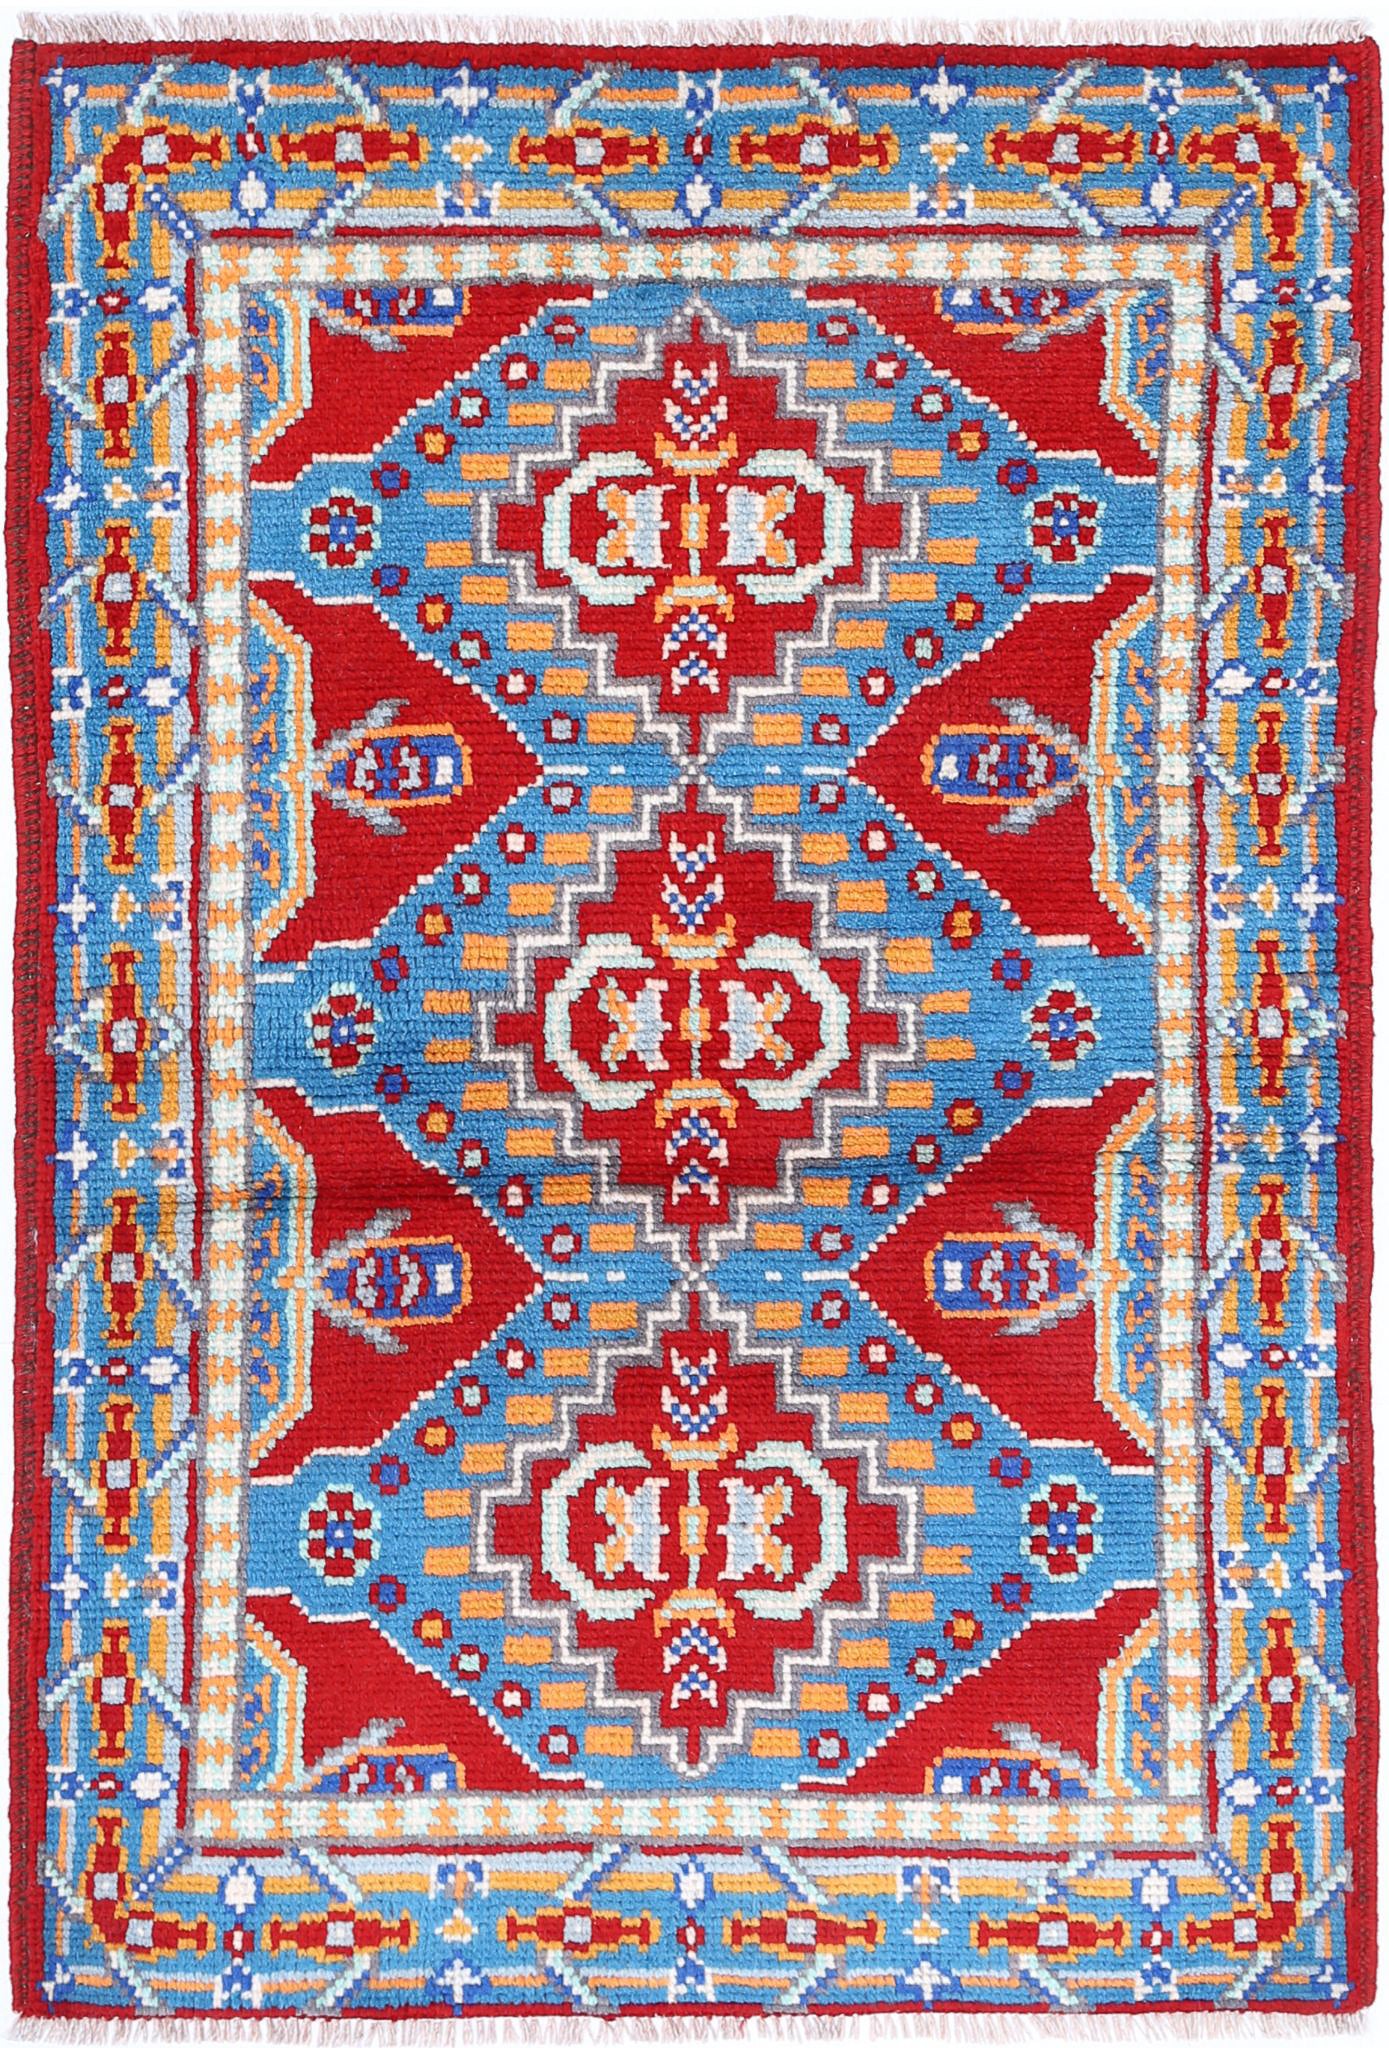 Revival-hand-knotted-qarghani-wool-rug-5014194.jpg